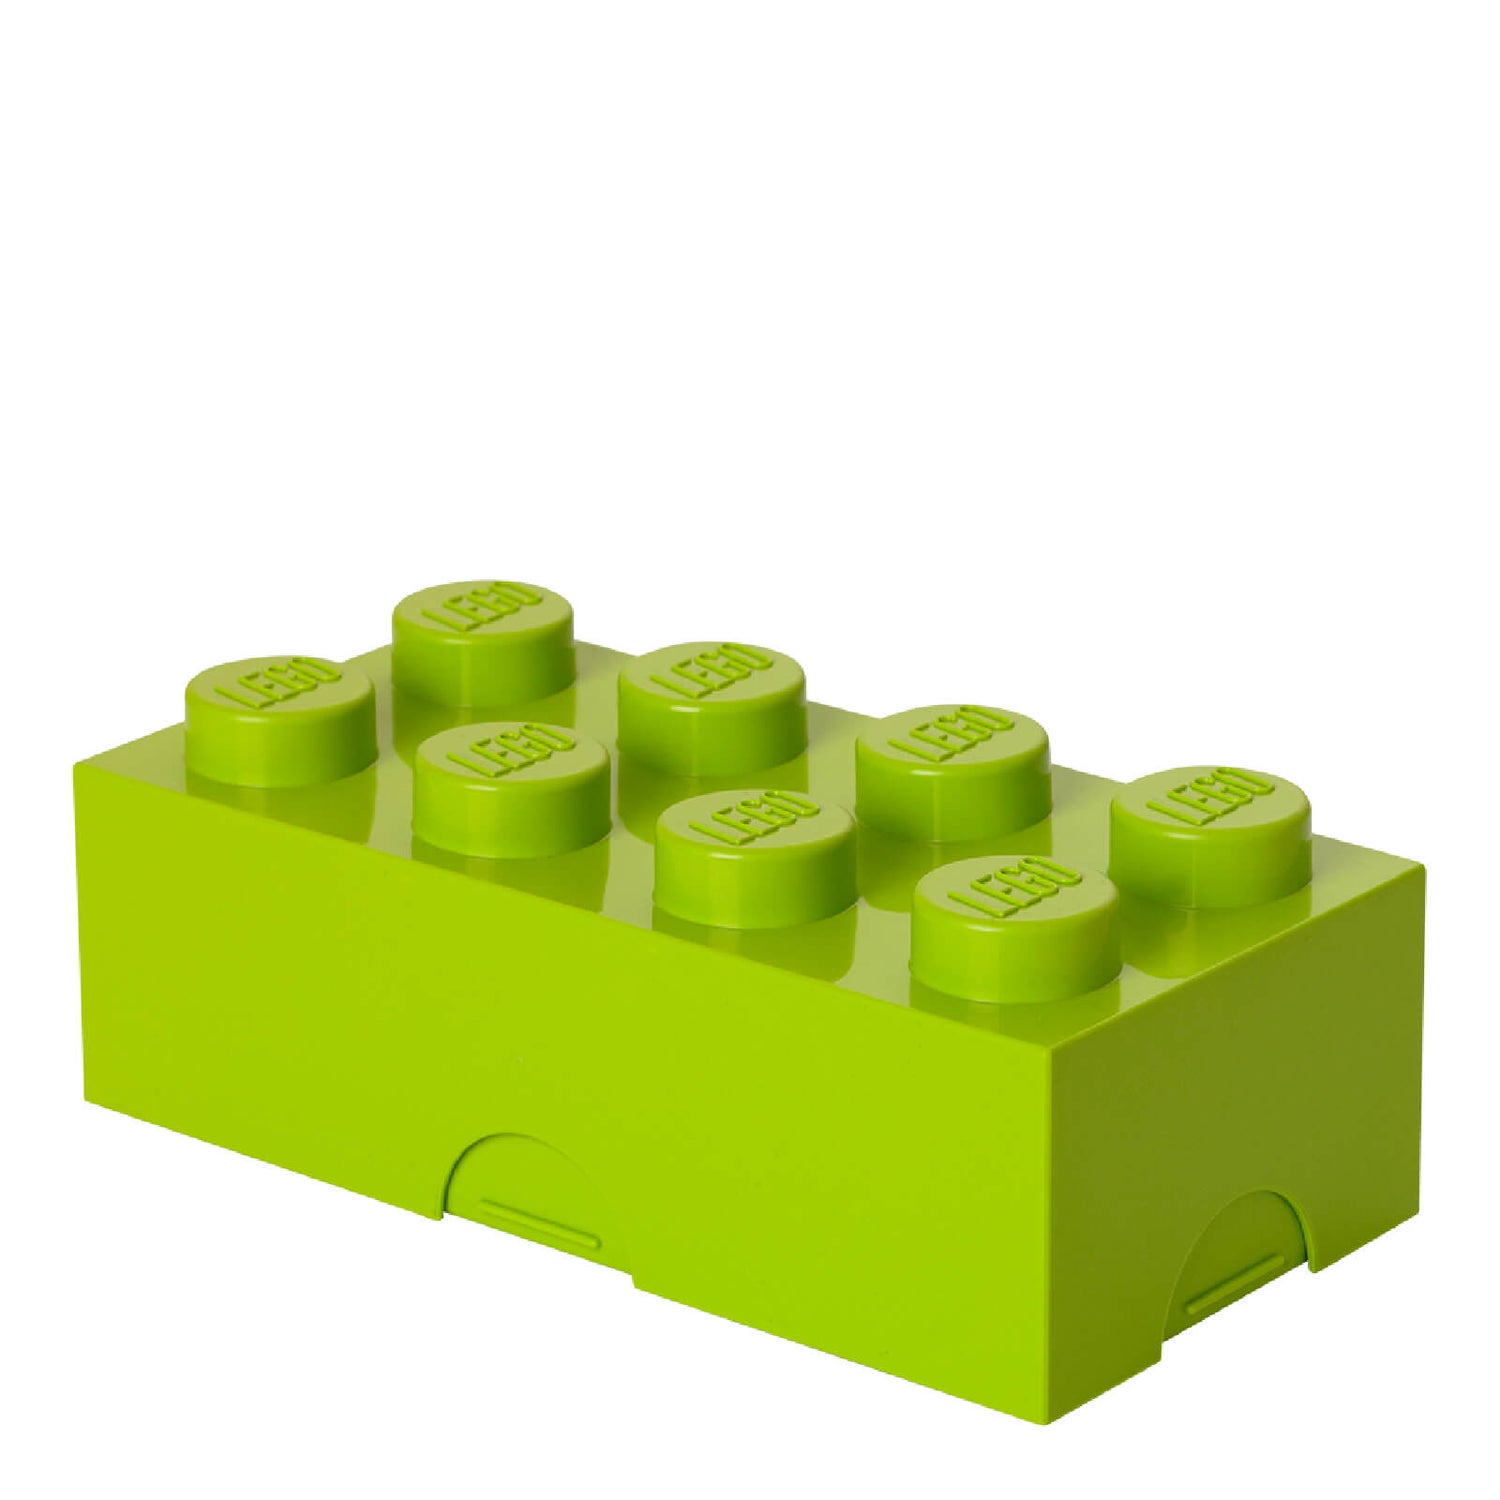 LEGO Lunch Box - Bright Lime Green